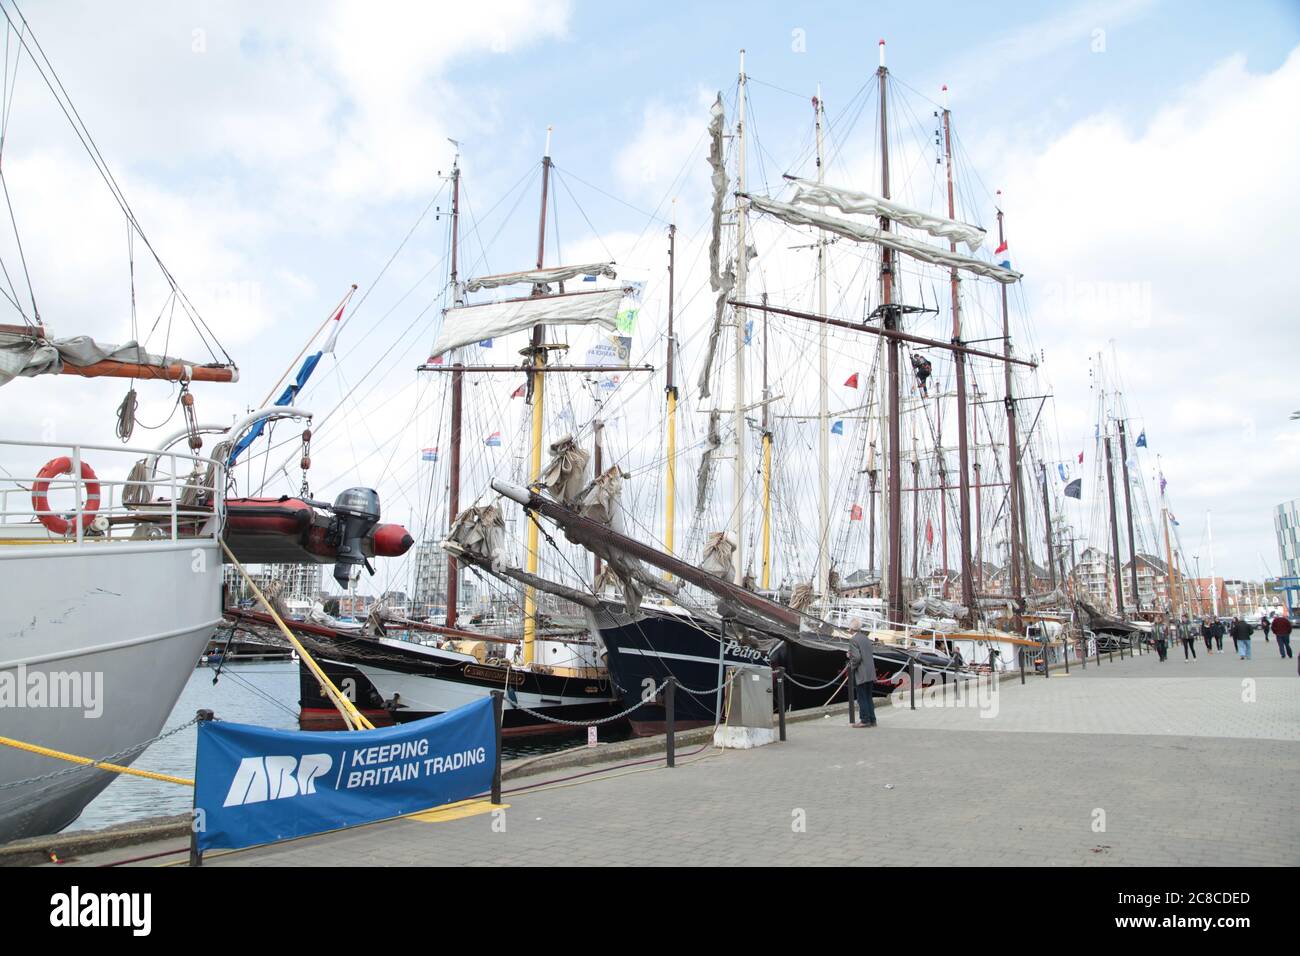 Ipswich Wet Dock with vintage sailing ships moored. Stock Photo